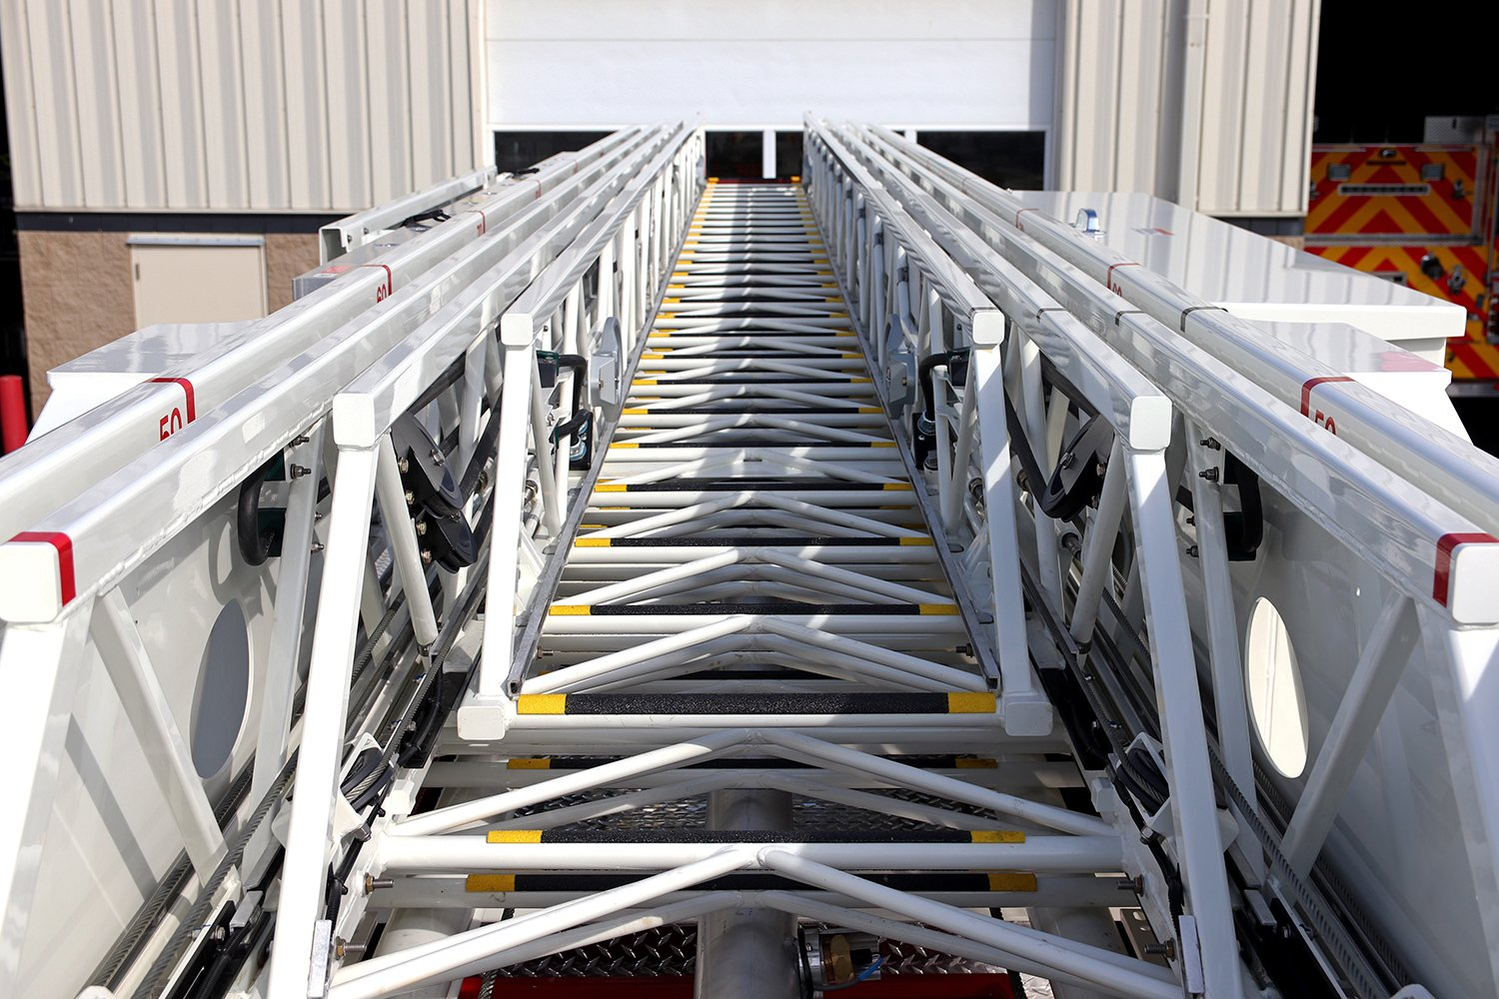 View looking across the ladder of a 100' Heavy-Duty Low Profile Steel Aerial Ladder truck.